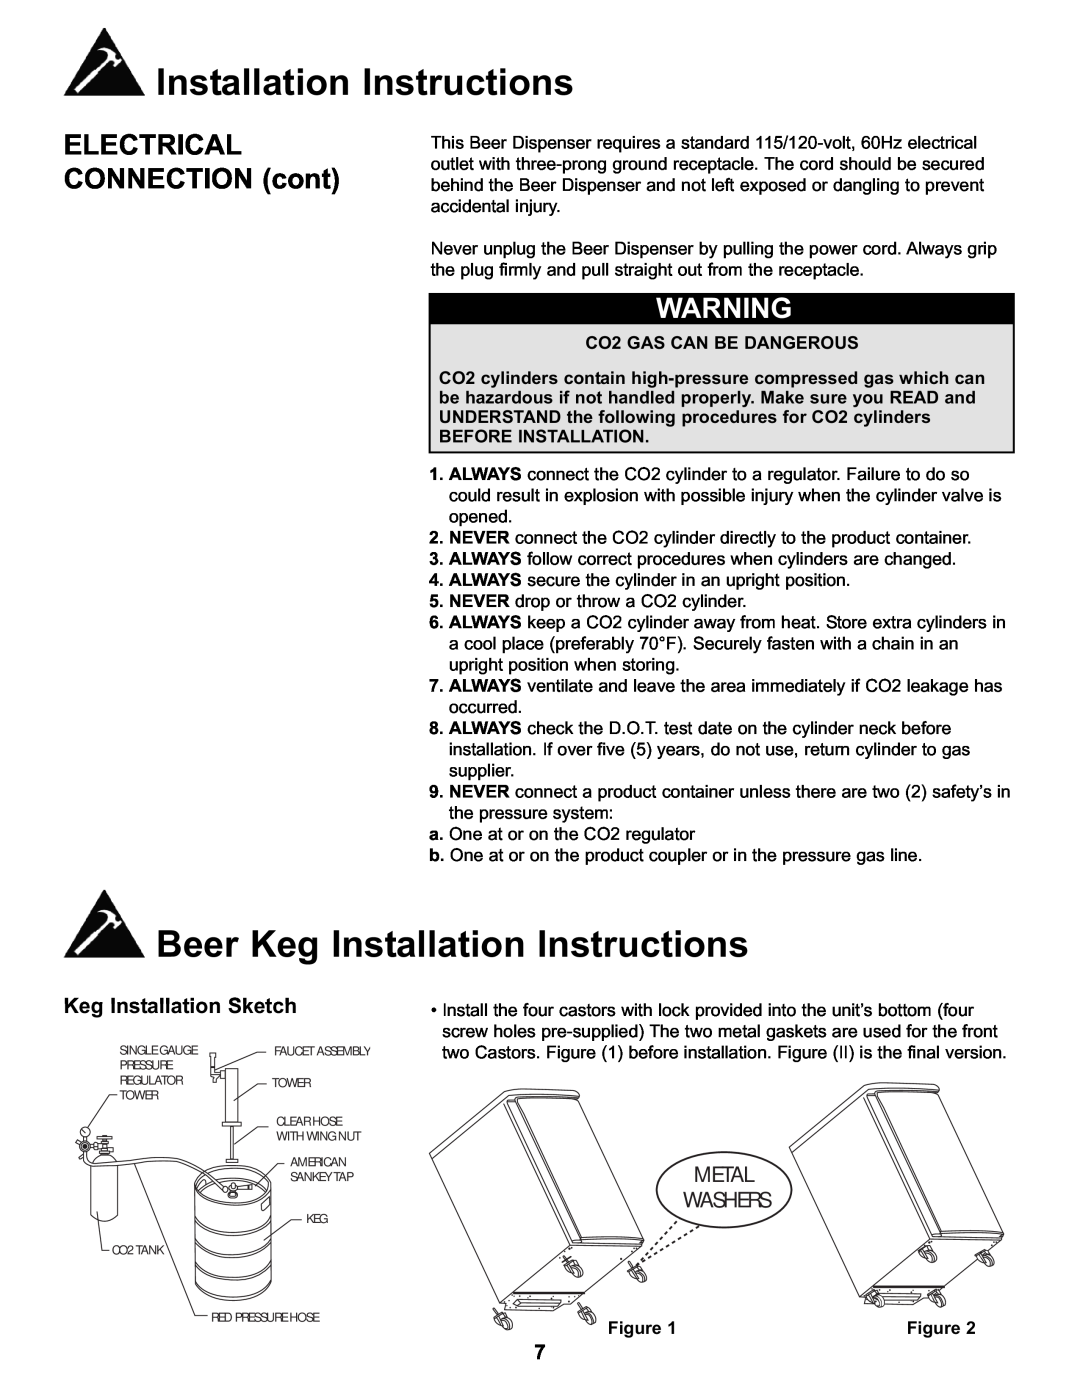 Danby DKC146SLDB Beer Keg Installation Instructions, ELECTRICAL CONNECTION cont, Keg Installation Sketch, Metal Washers 